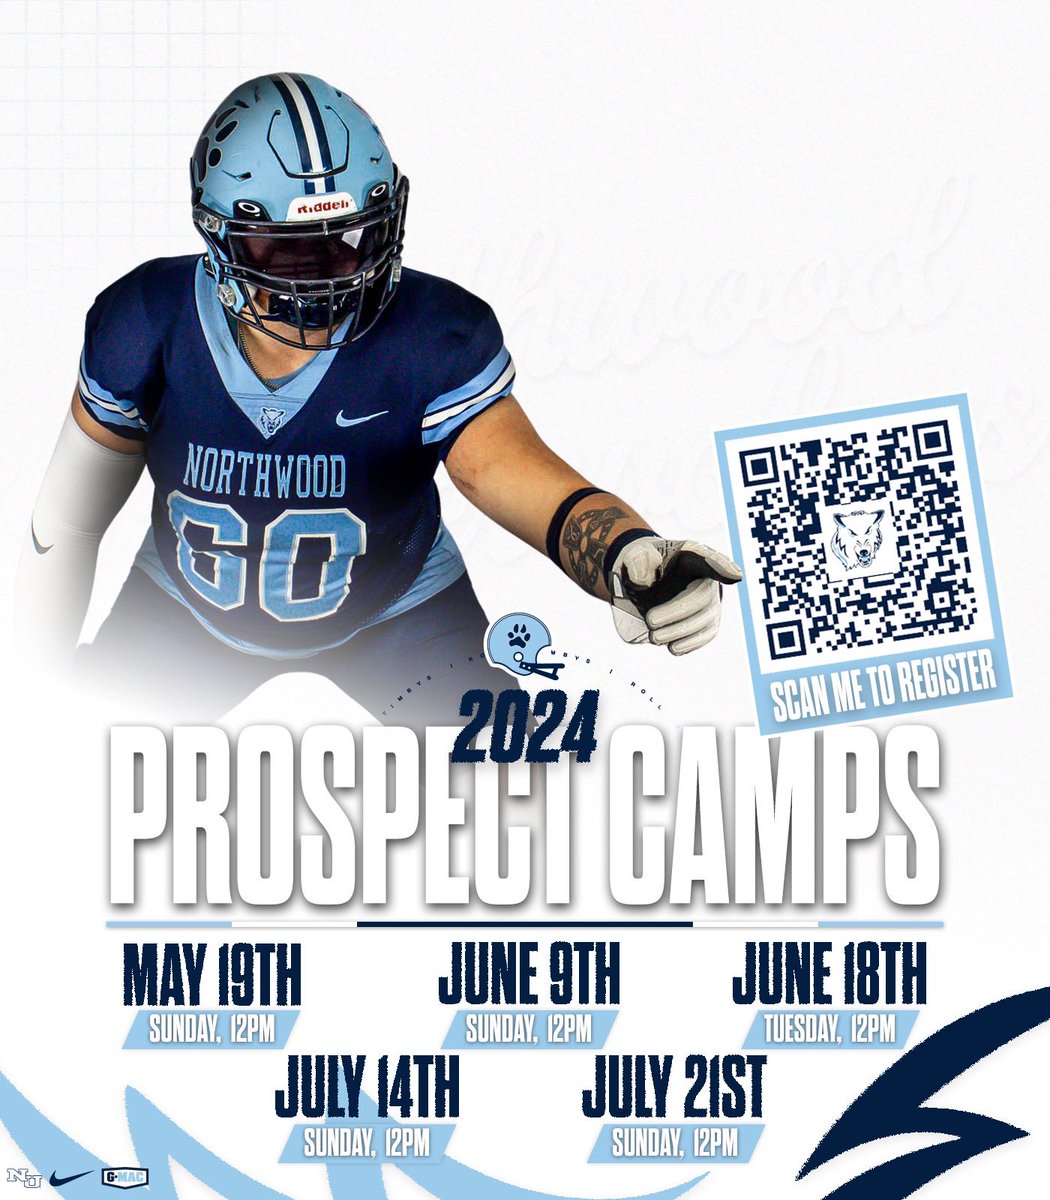 Make sure to get register for our Prospect Camps this summer! northwoodfootballcamps.totalcamps.com/shop/EVENT #LetItRip #RollTimbys